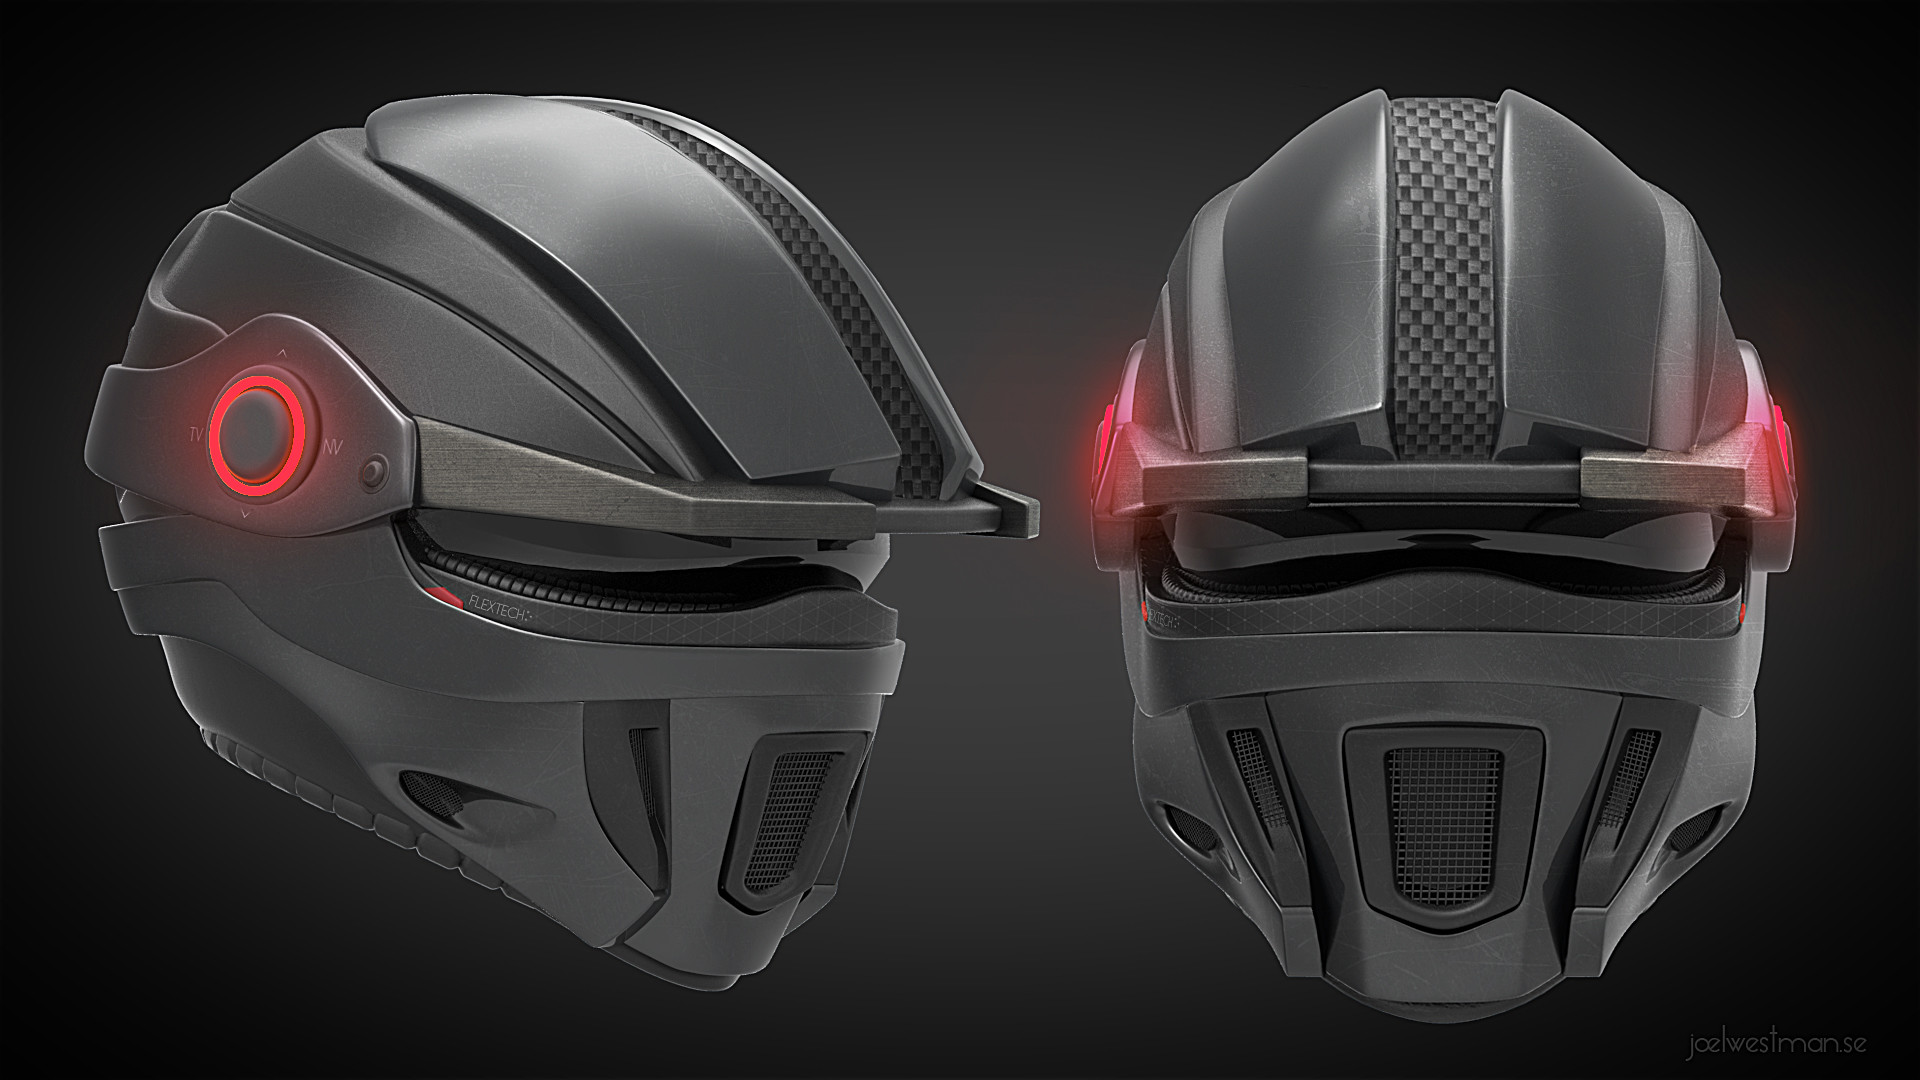 Top 10 Coolest Helmet Concepts on Artstation that could be Motorcycle